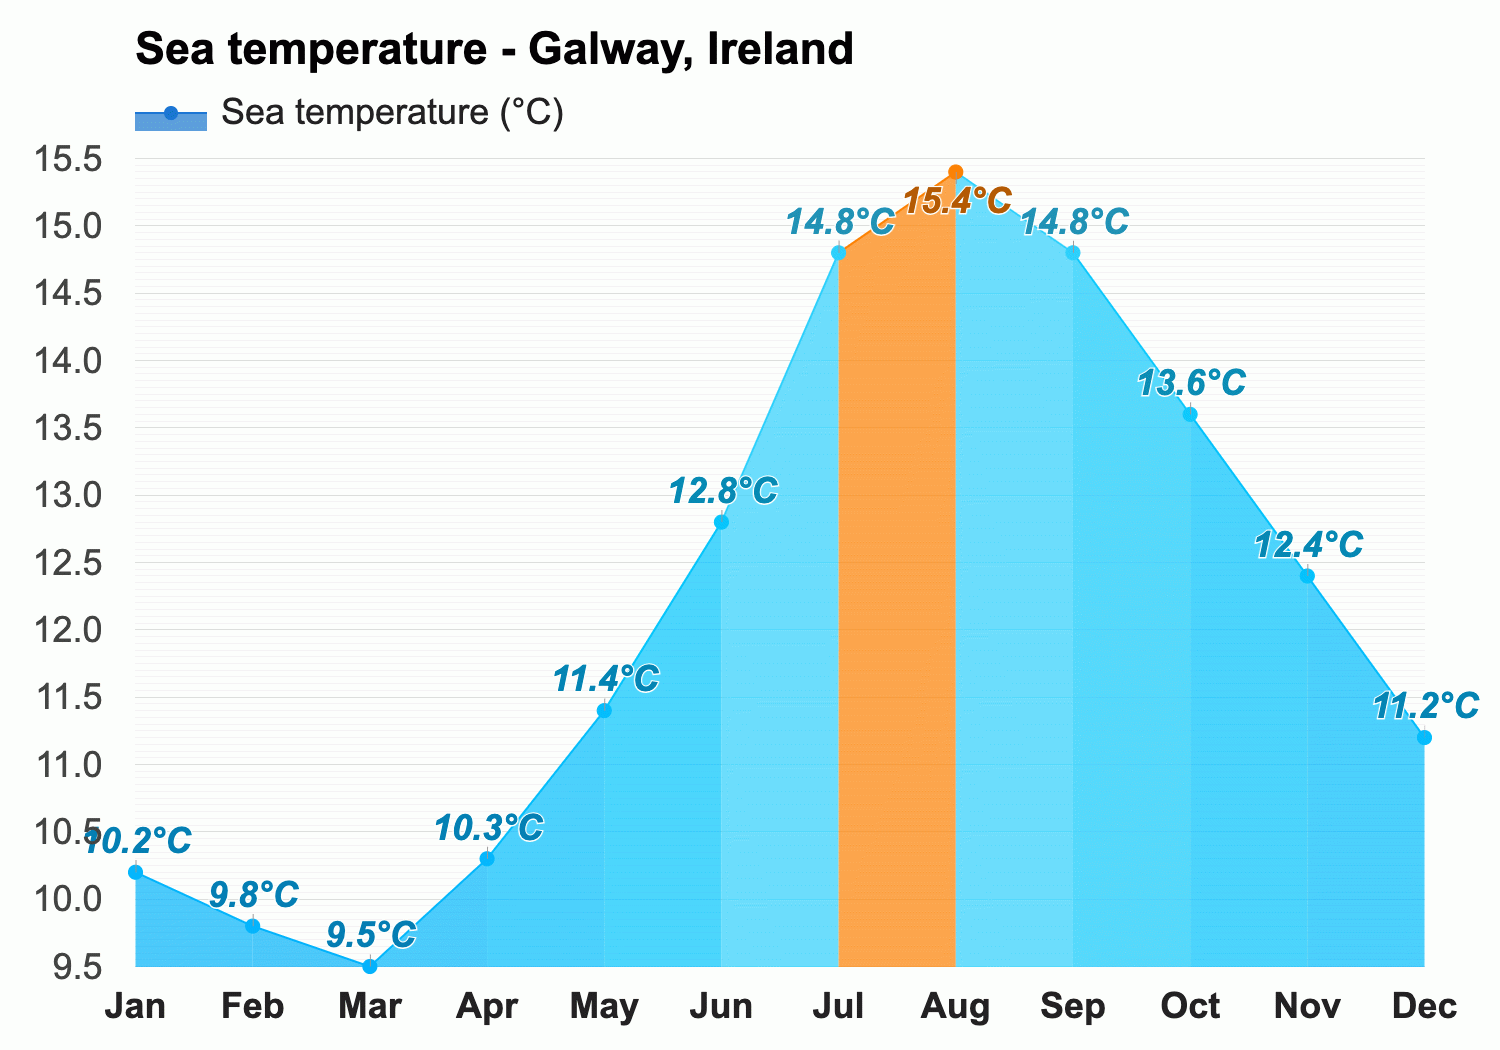 Galway, Ireland - Climate & Monthly weather forecast